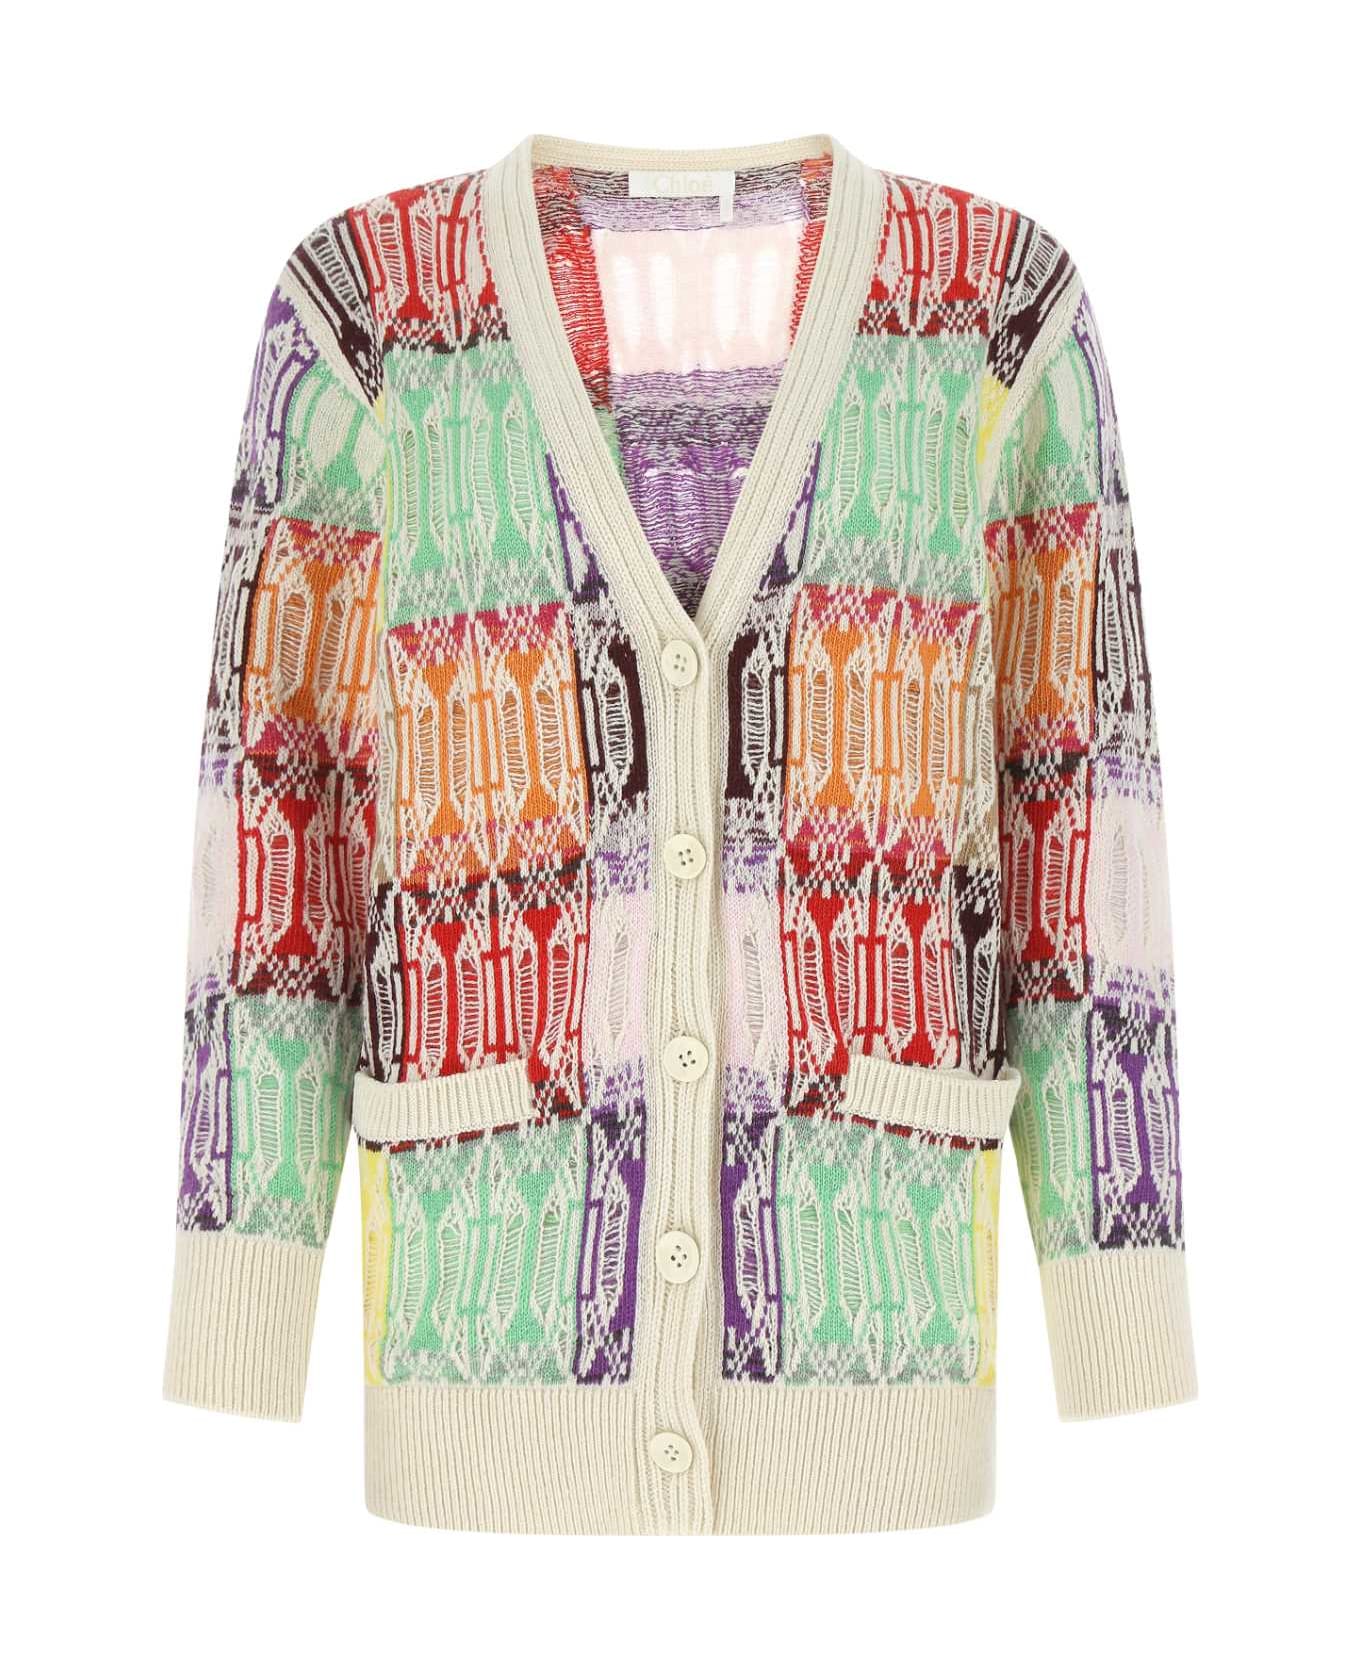 Chloé Embroidered Cashmere Blend Cardigan - 9CA カーディガン